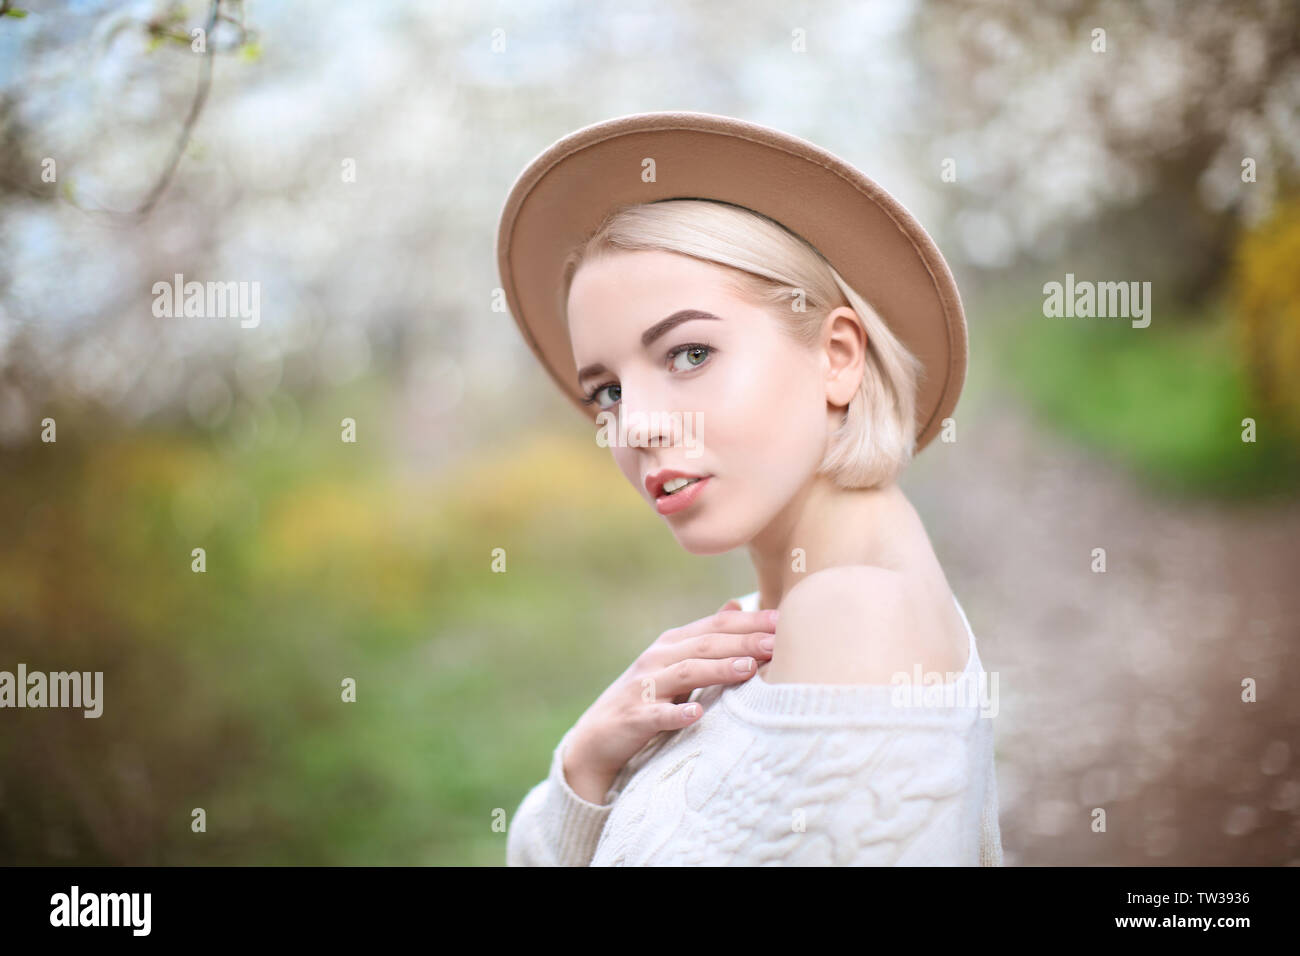 Young blonde girl in hat on blurred background Stock Photo